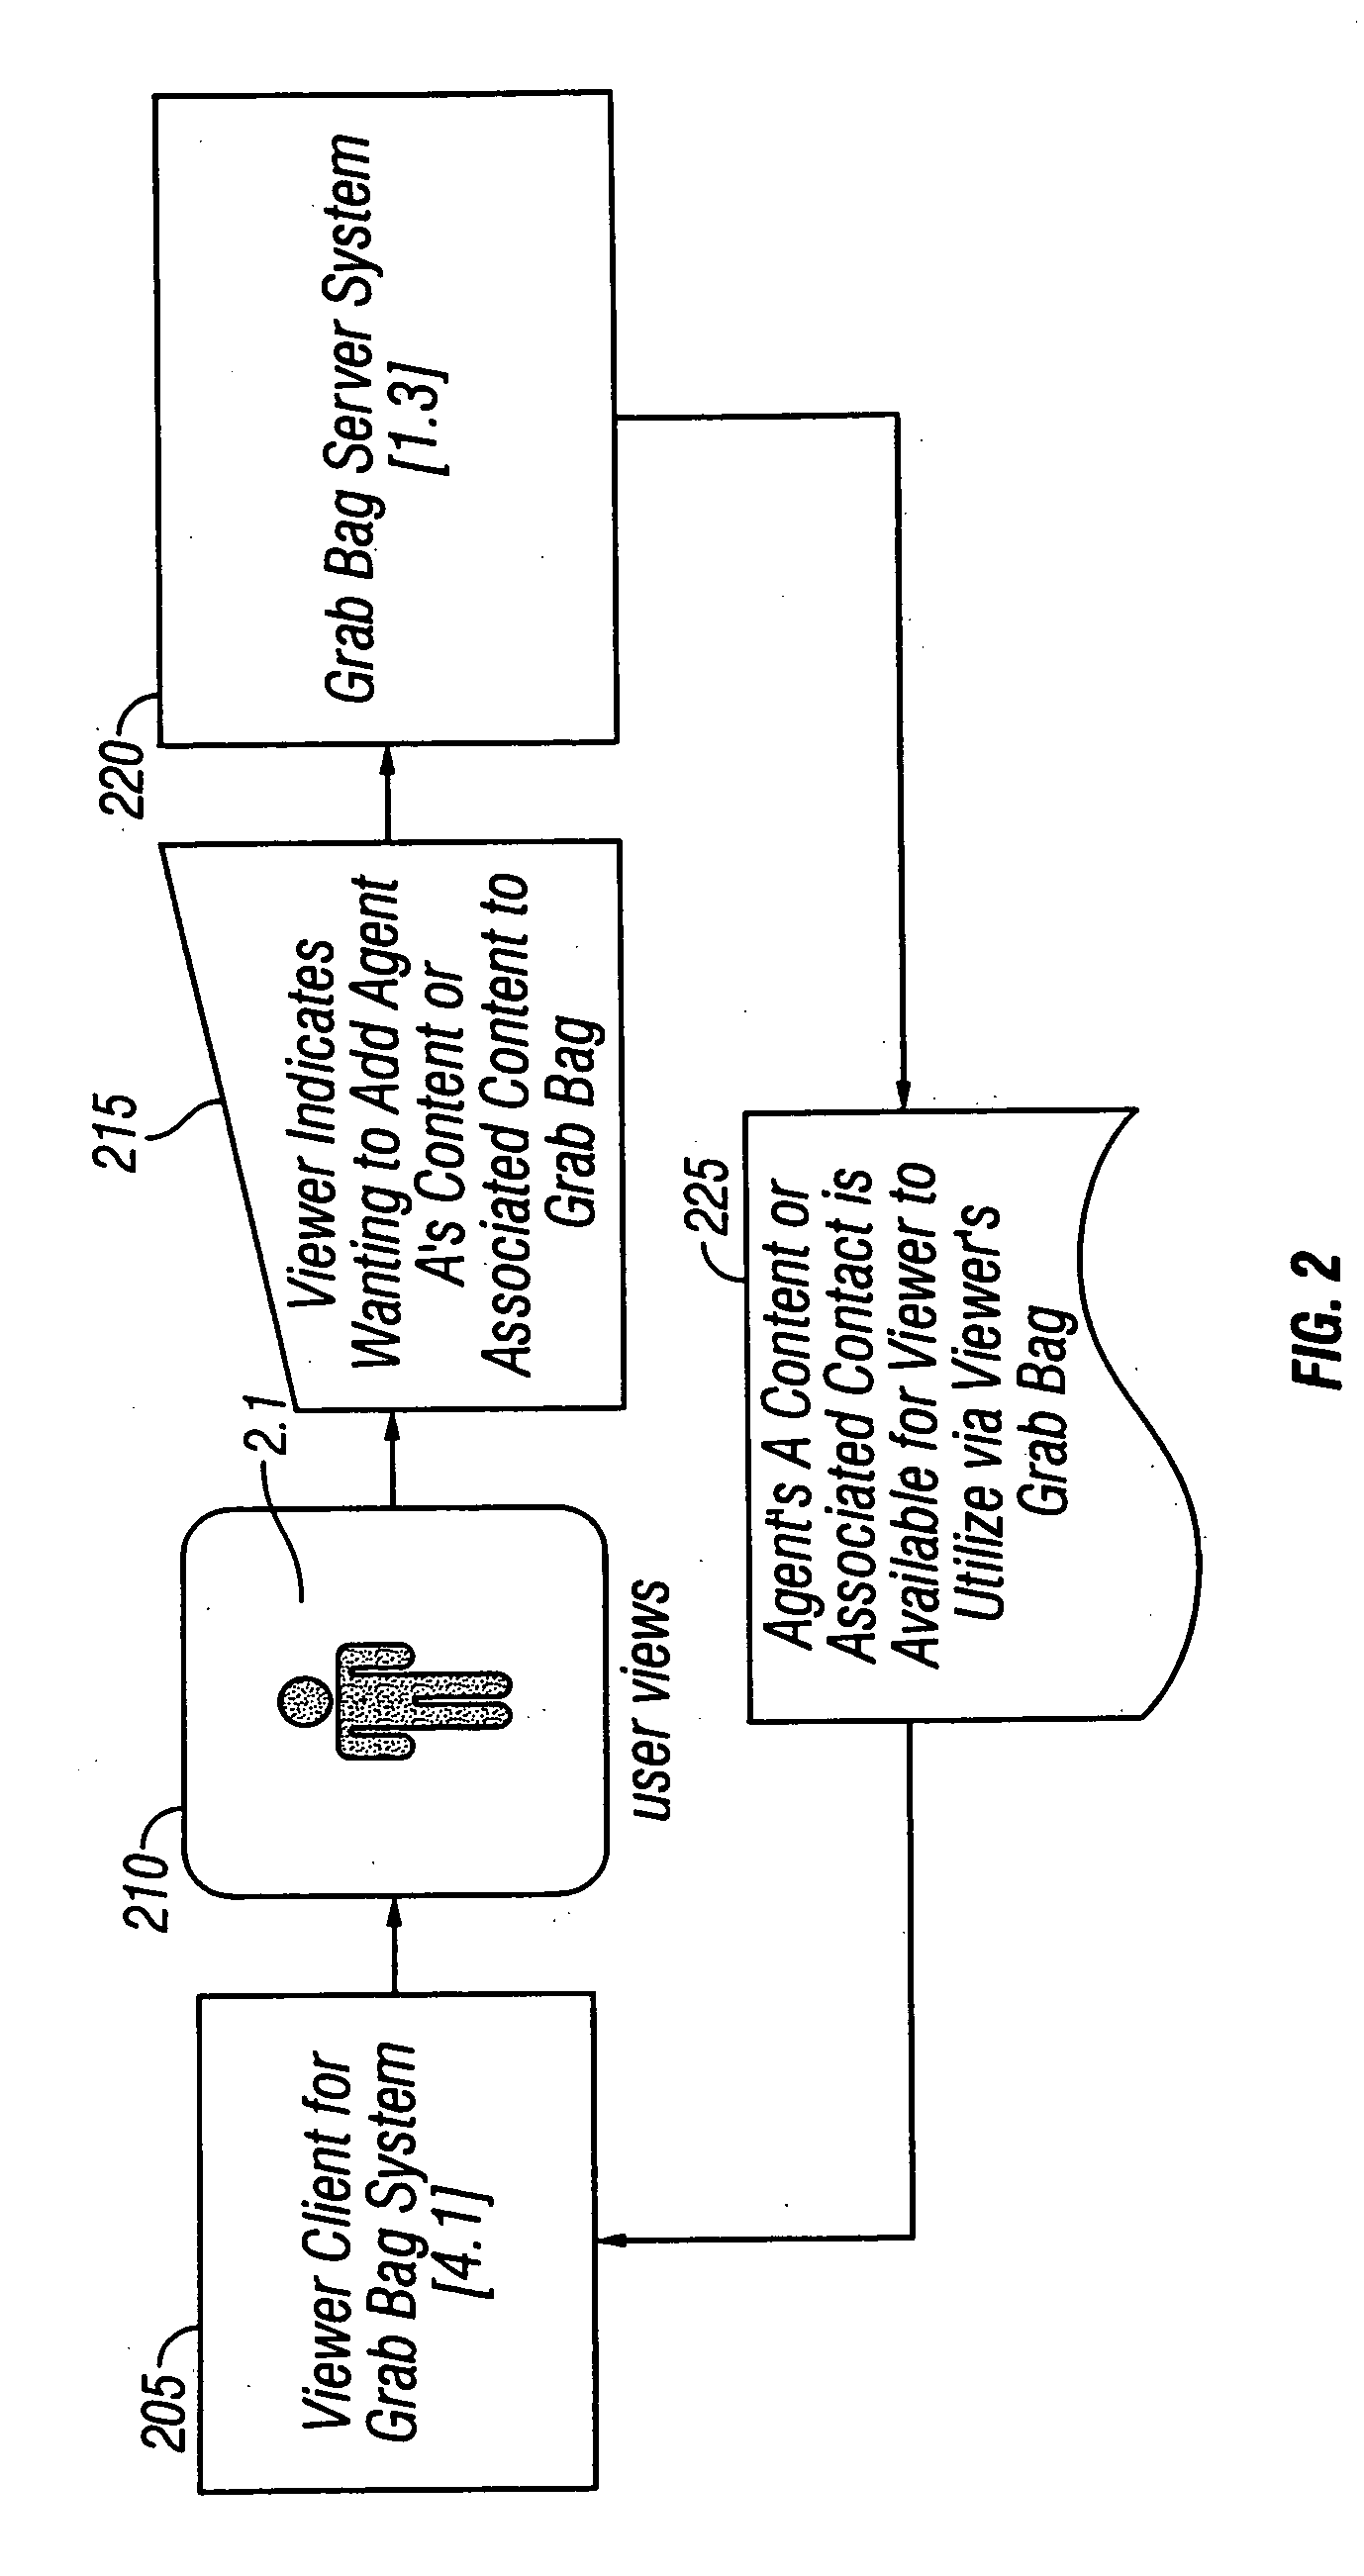 Method and system for collecting, sharing and tracking user or group associates content via a communications network